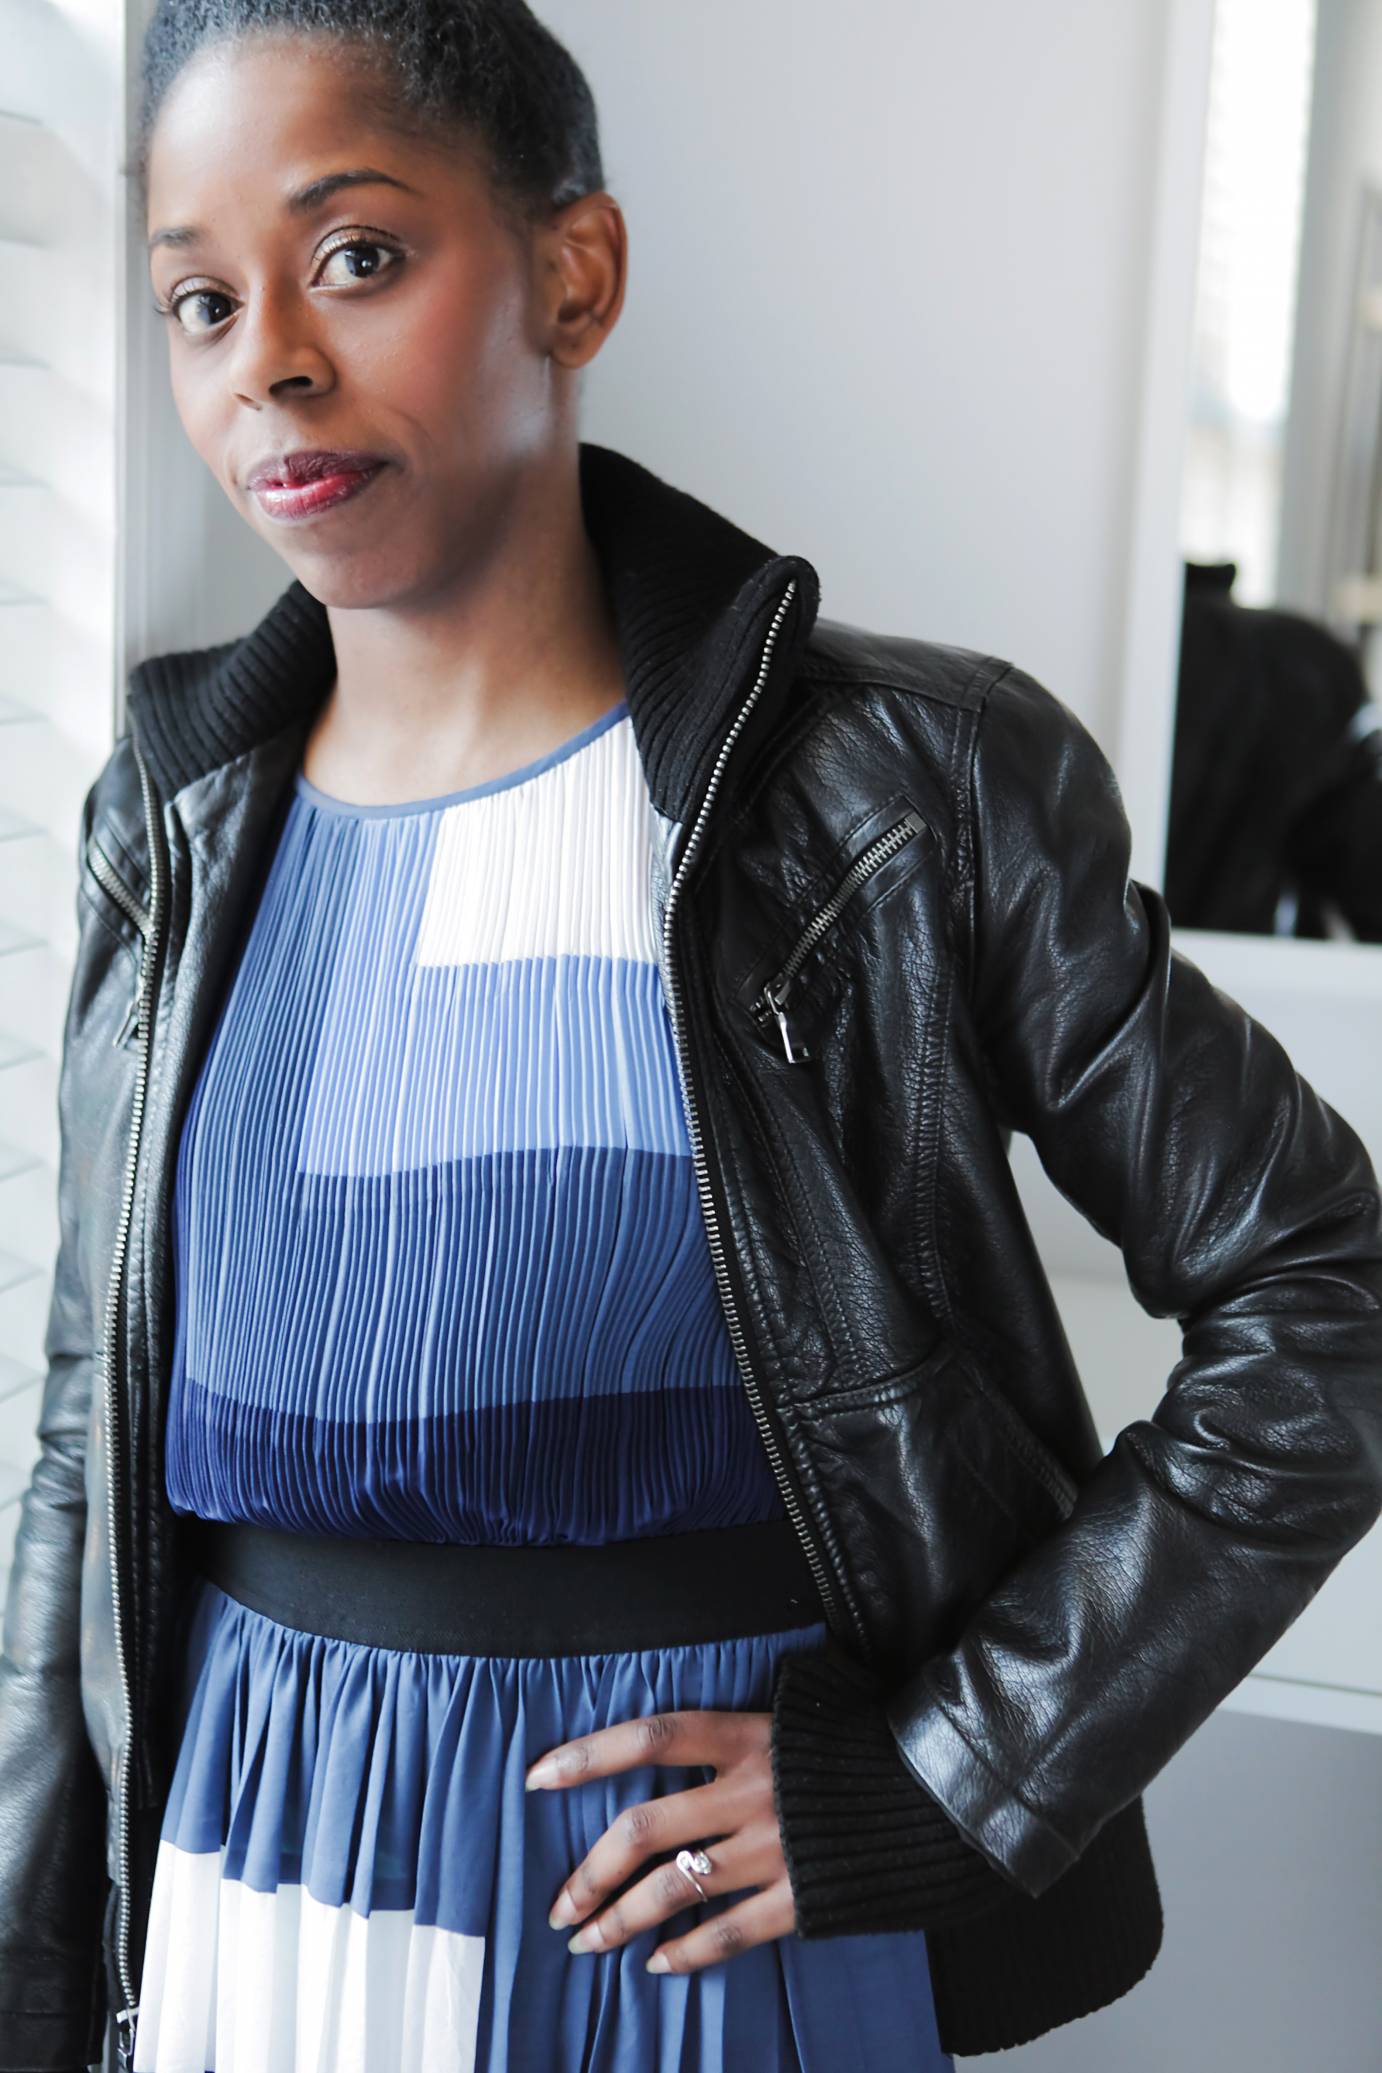 Portrait of Tiffany Rae Fisher a Black woman with big brown eyes and hair tightly pulled back leaning against a white wall as she stares out at us.She is wearing a dark blue, light blue and white pleated dress and a black leather bomber jacket.